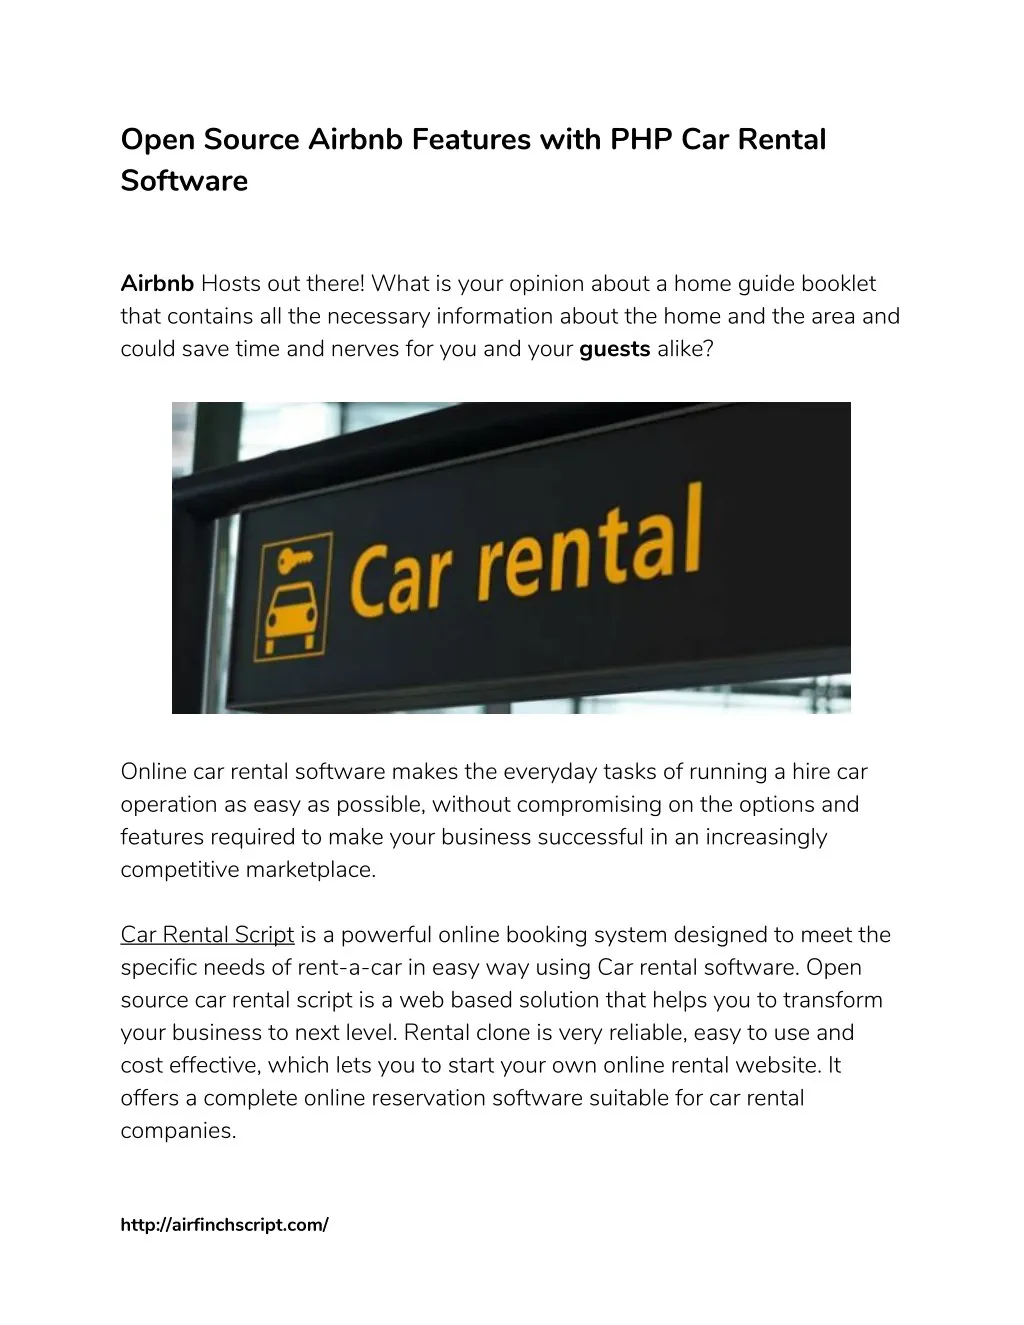 open source airbnb features with php car rental